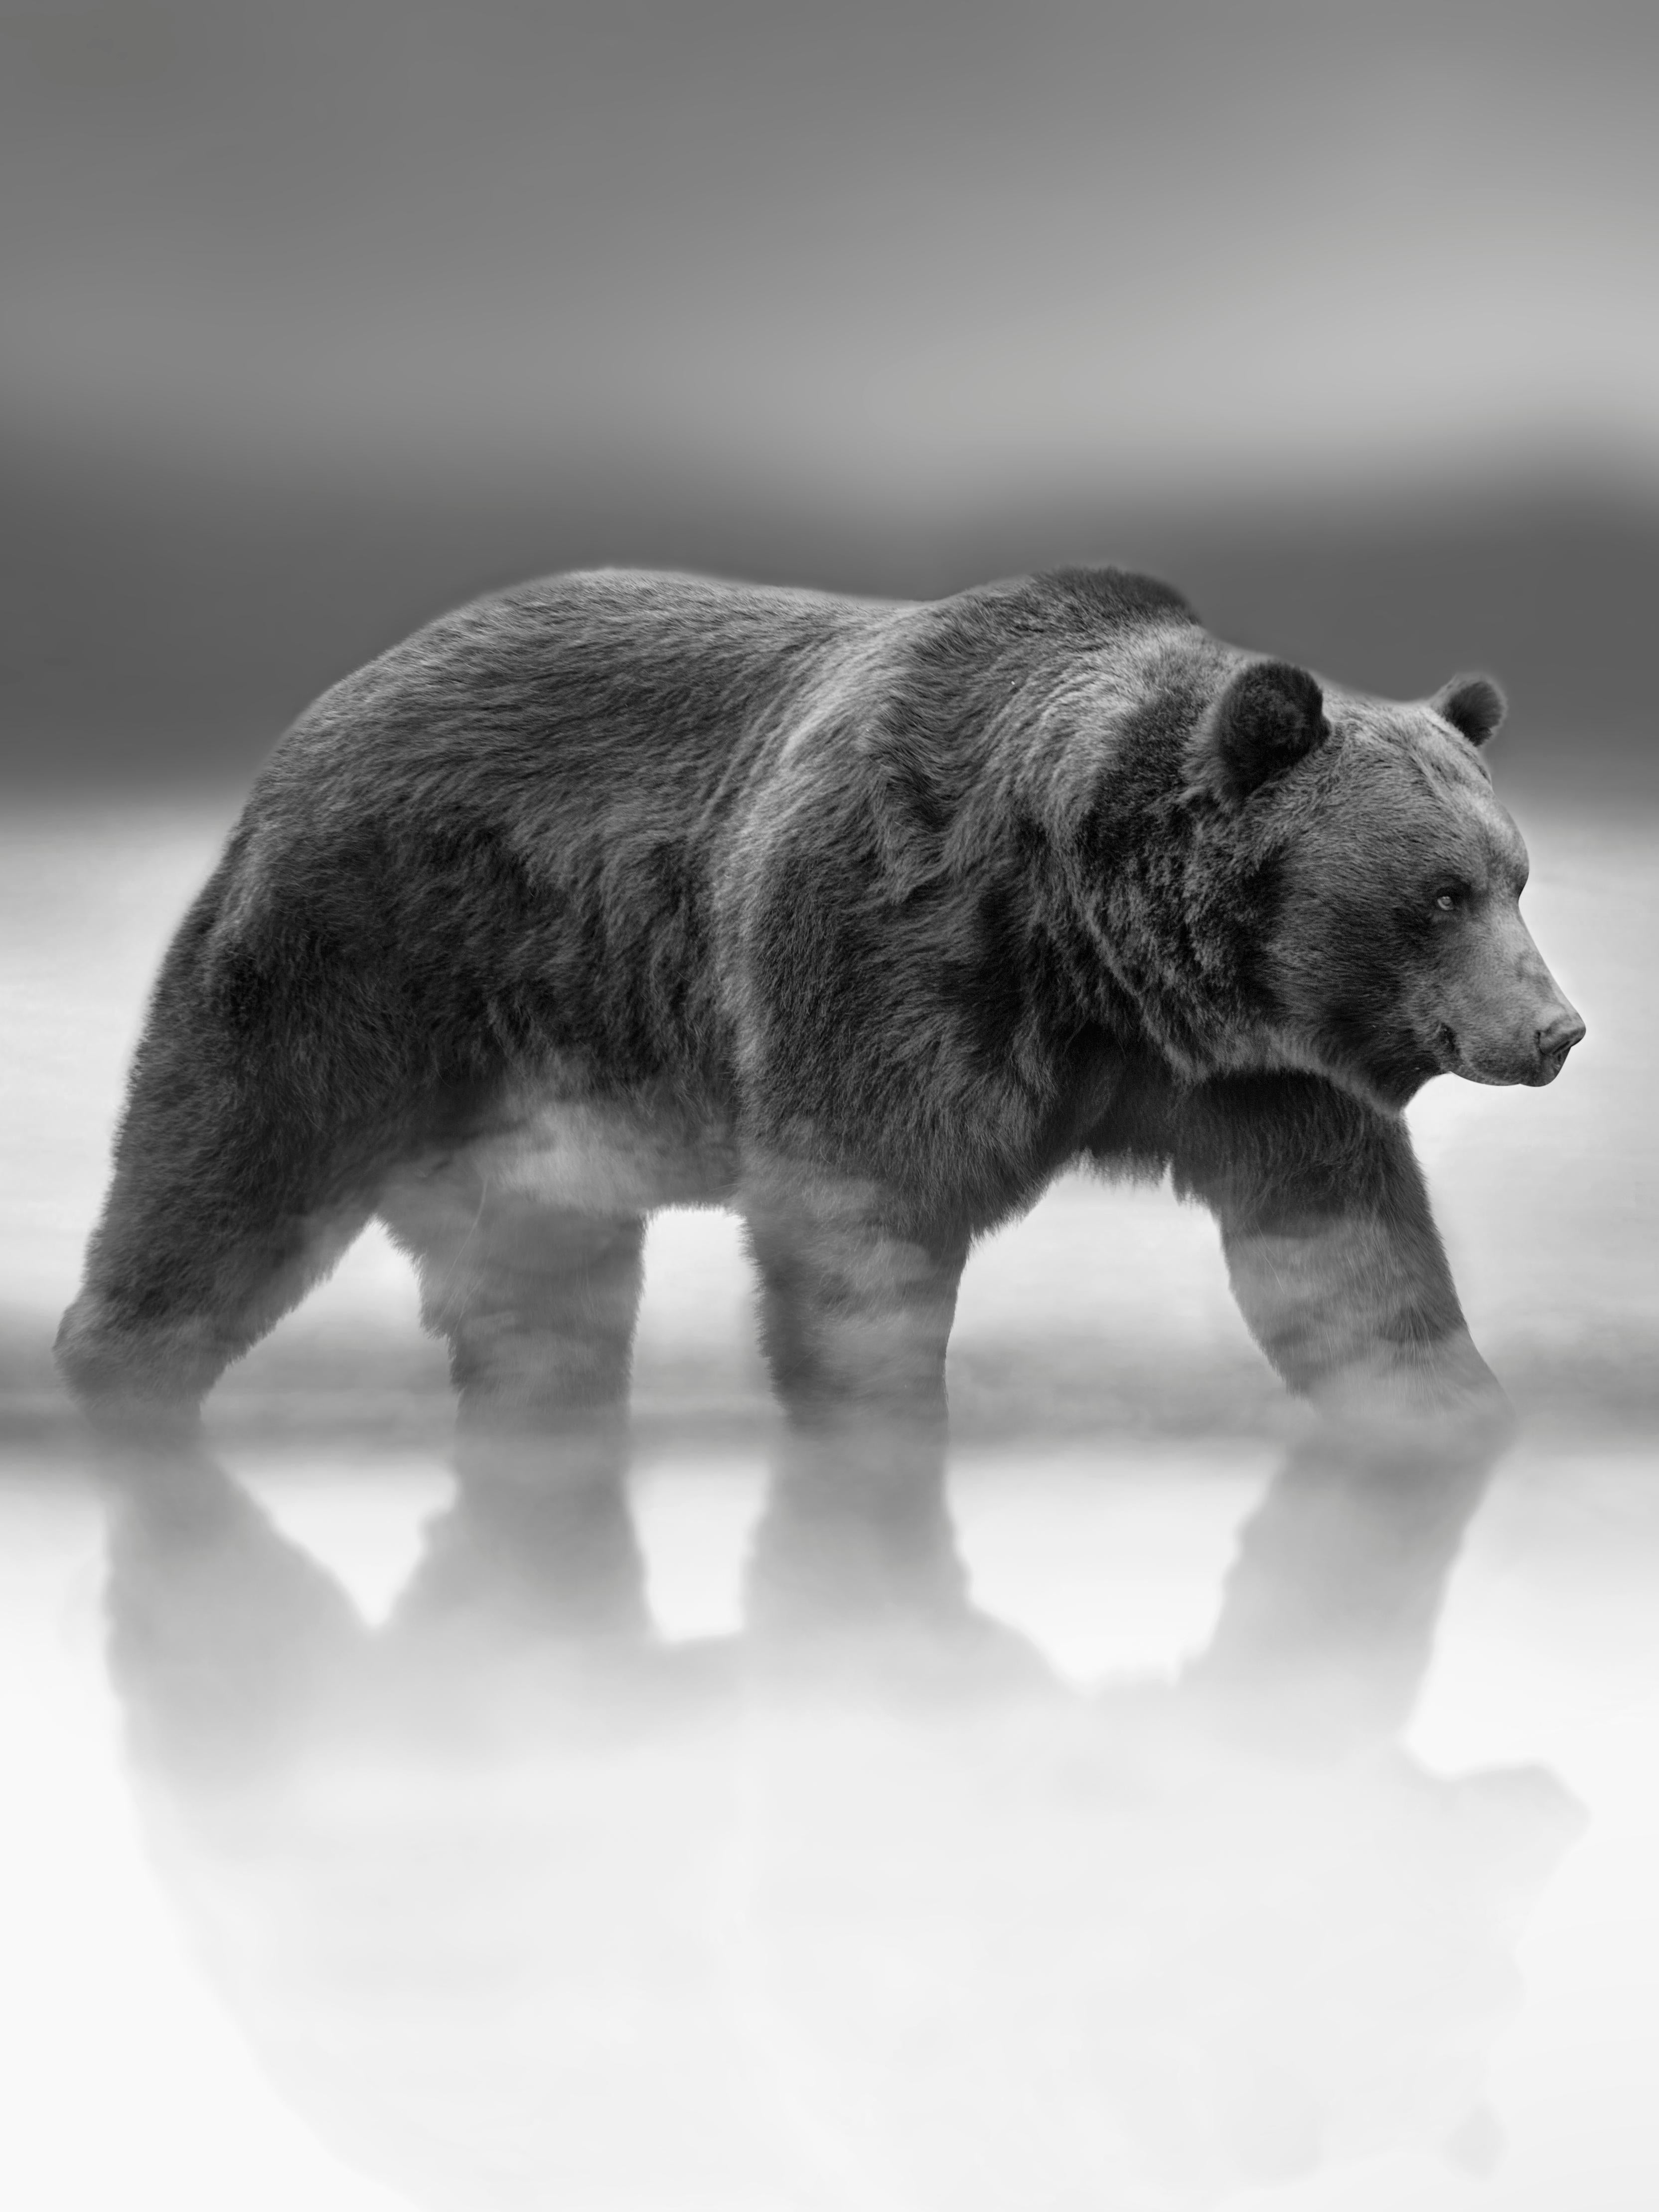 Shane Russeck Black and White Photograph - Reflections 24x36 Black & White Photography, Kodiak Bear Photograph Grizzly